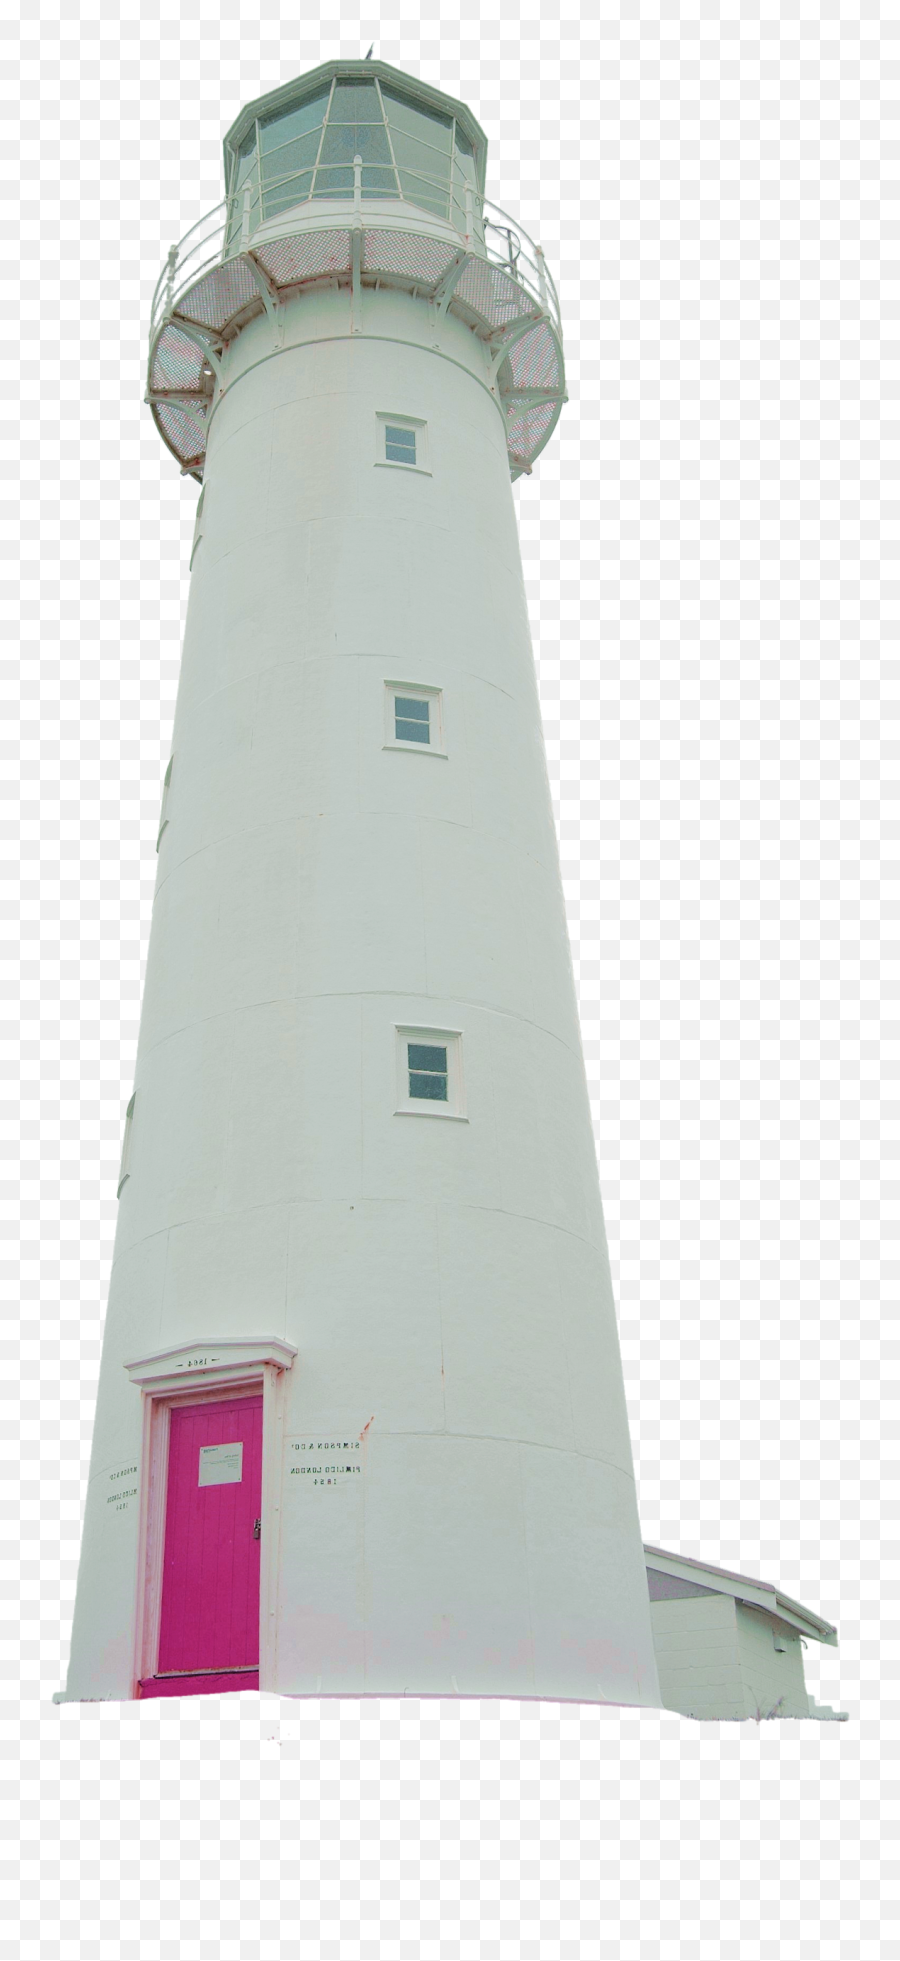 Lighthouse Png Transparent Image - Cape May,Light House Png